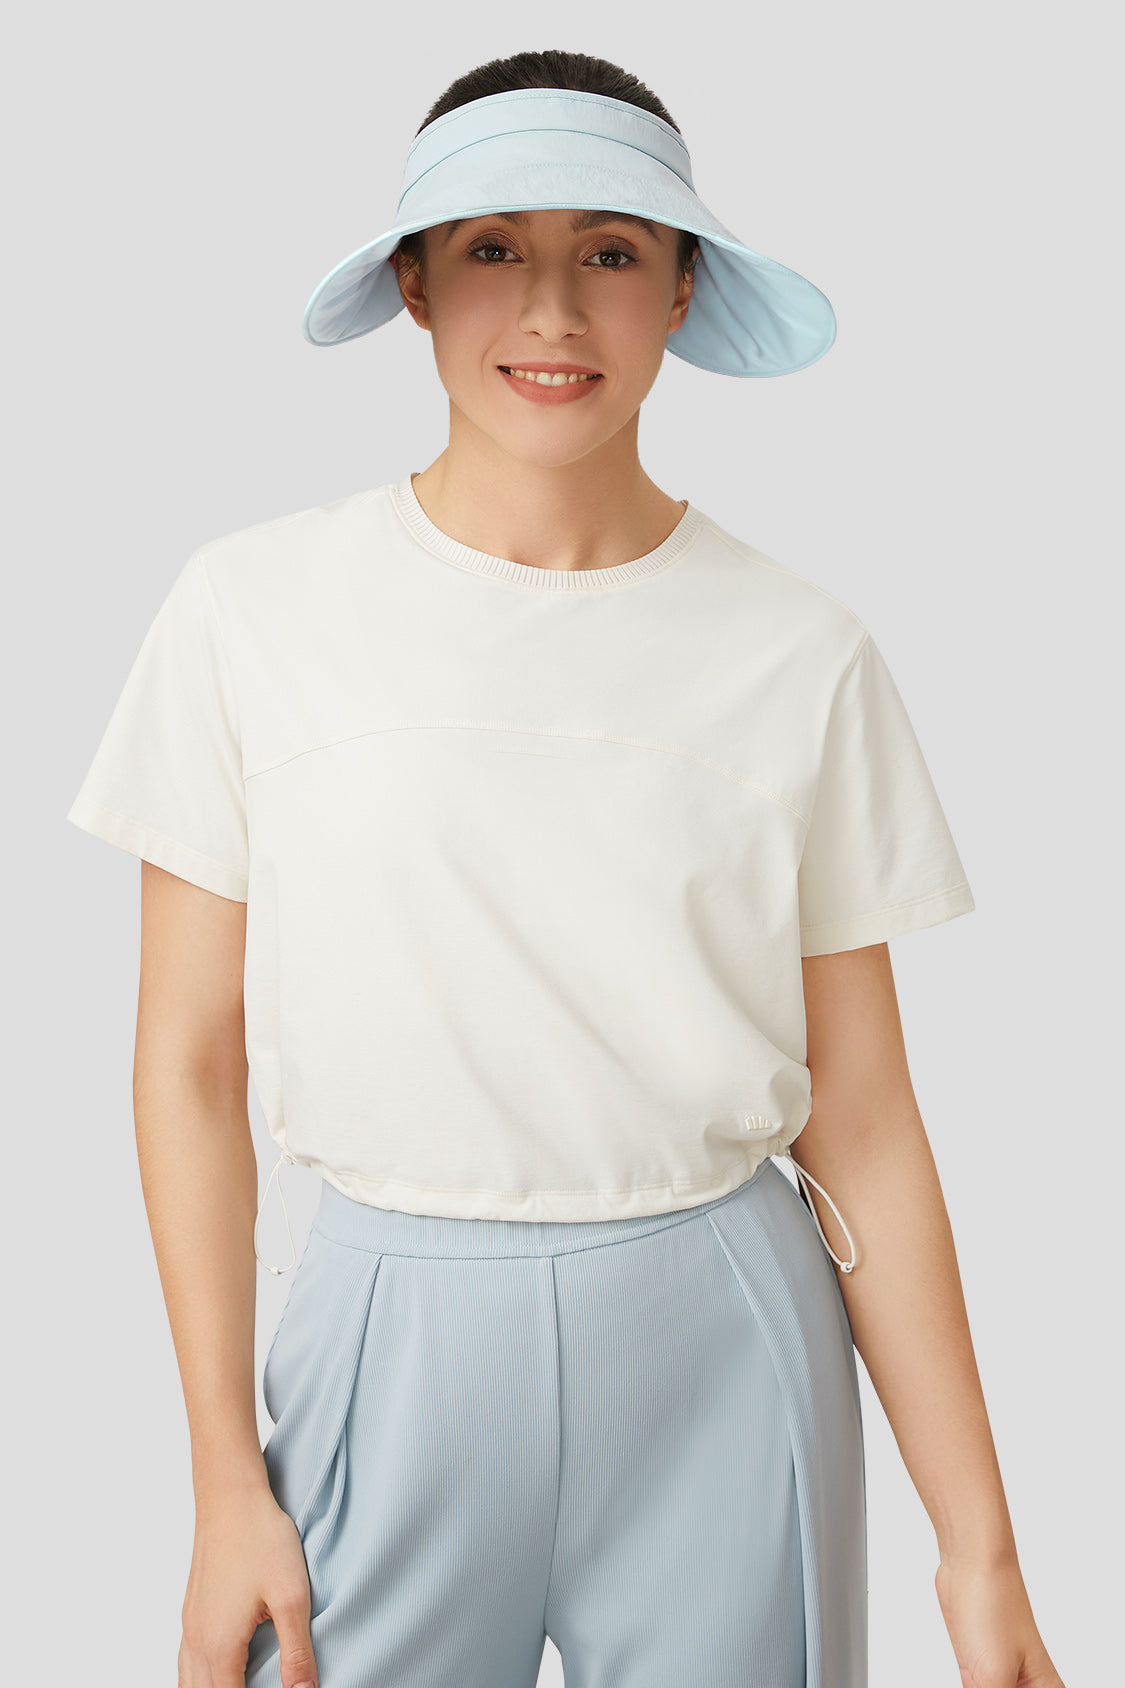 Best Hats For Sun Protection 2023 - Forbes Vetted